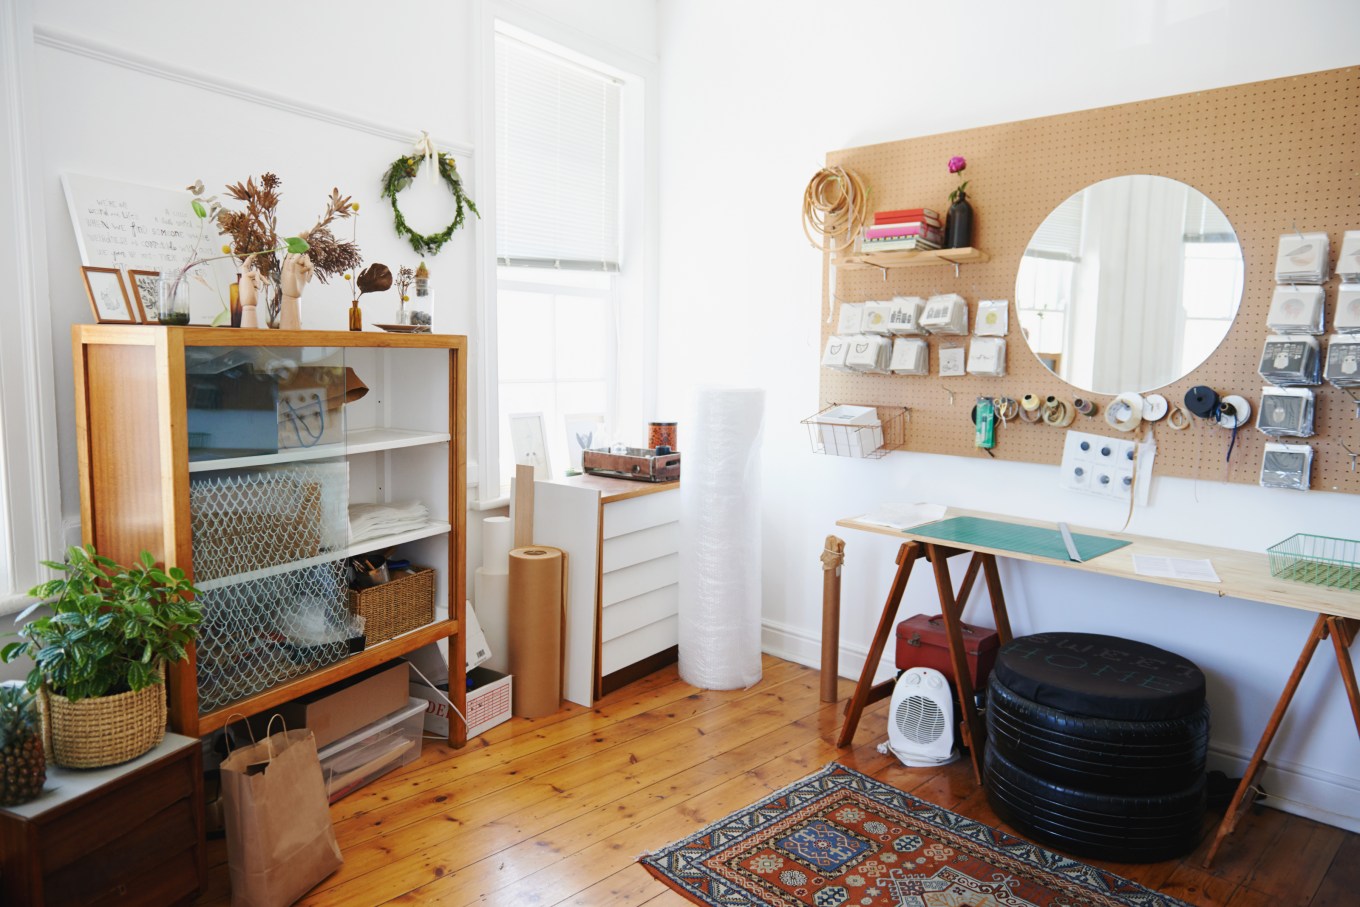 An example of a good craft room set up with a table and drawer space for crafts or hobbies.